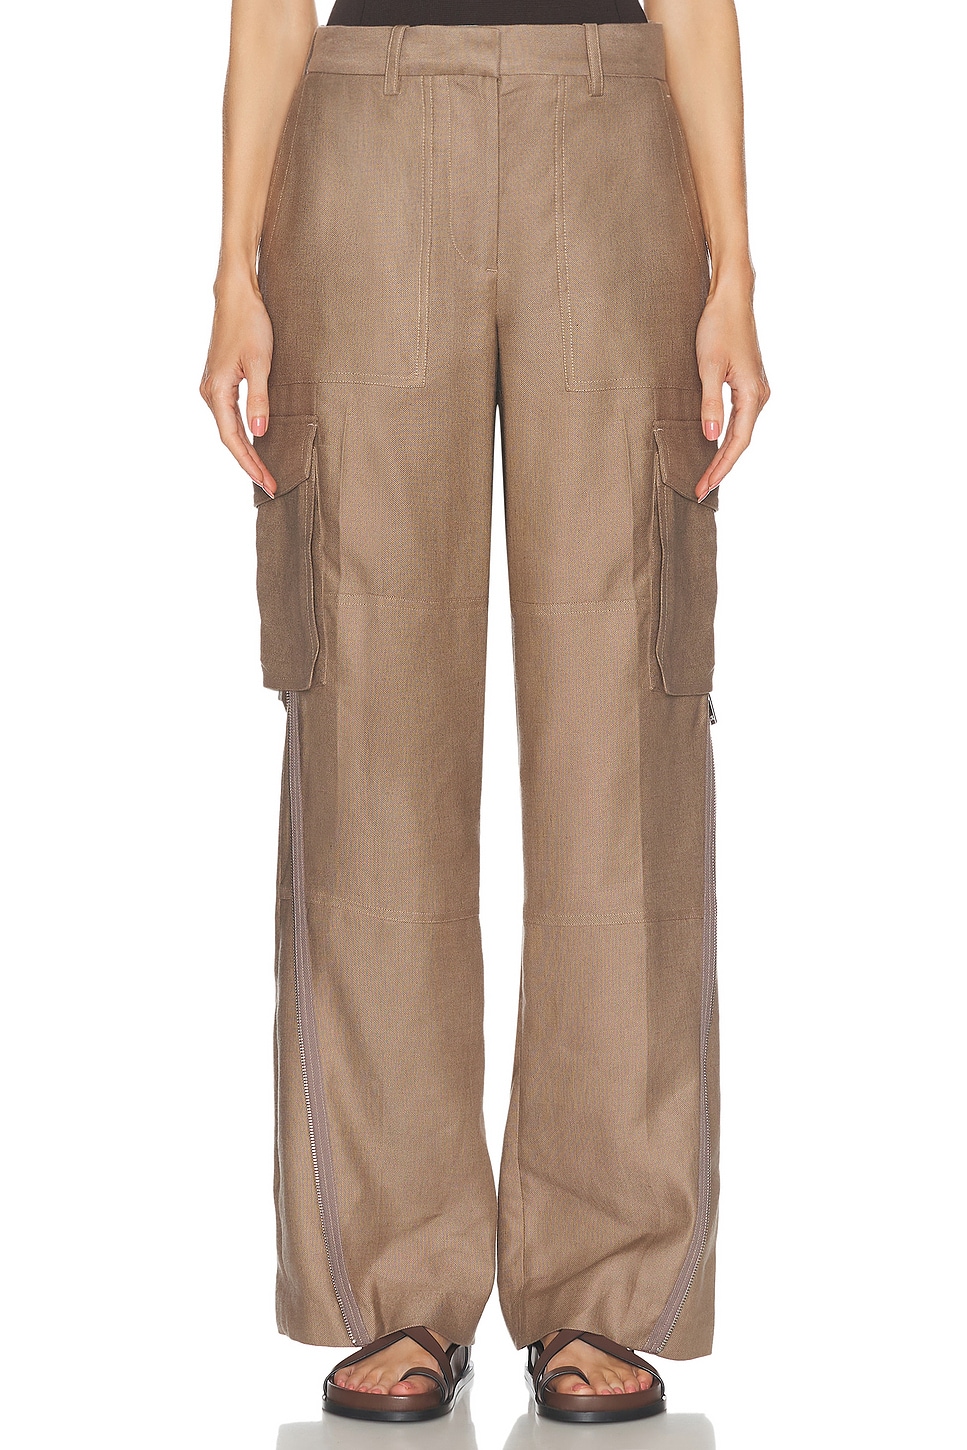 Image 1 of Helmut Lang Cargo Pant in Driftwood